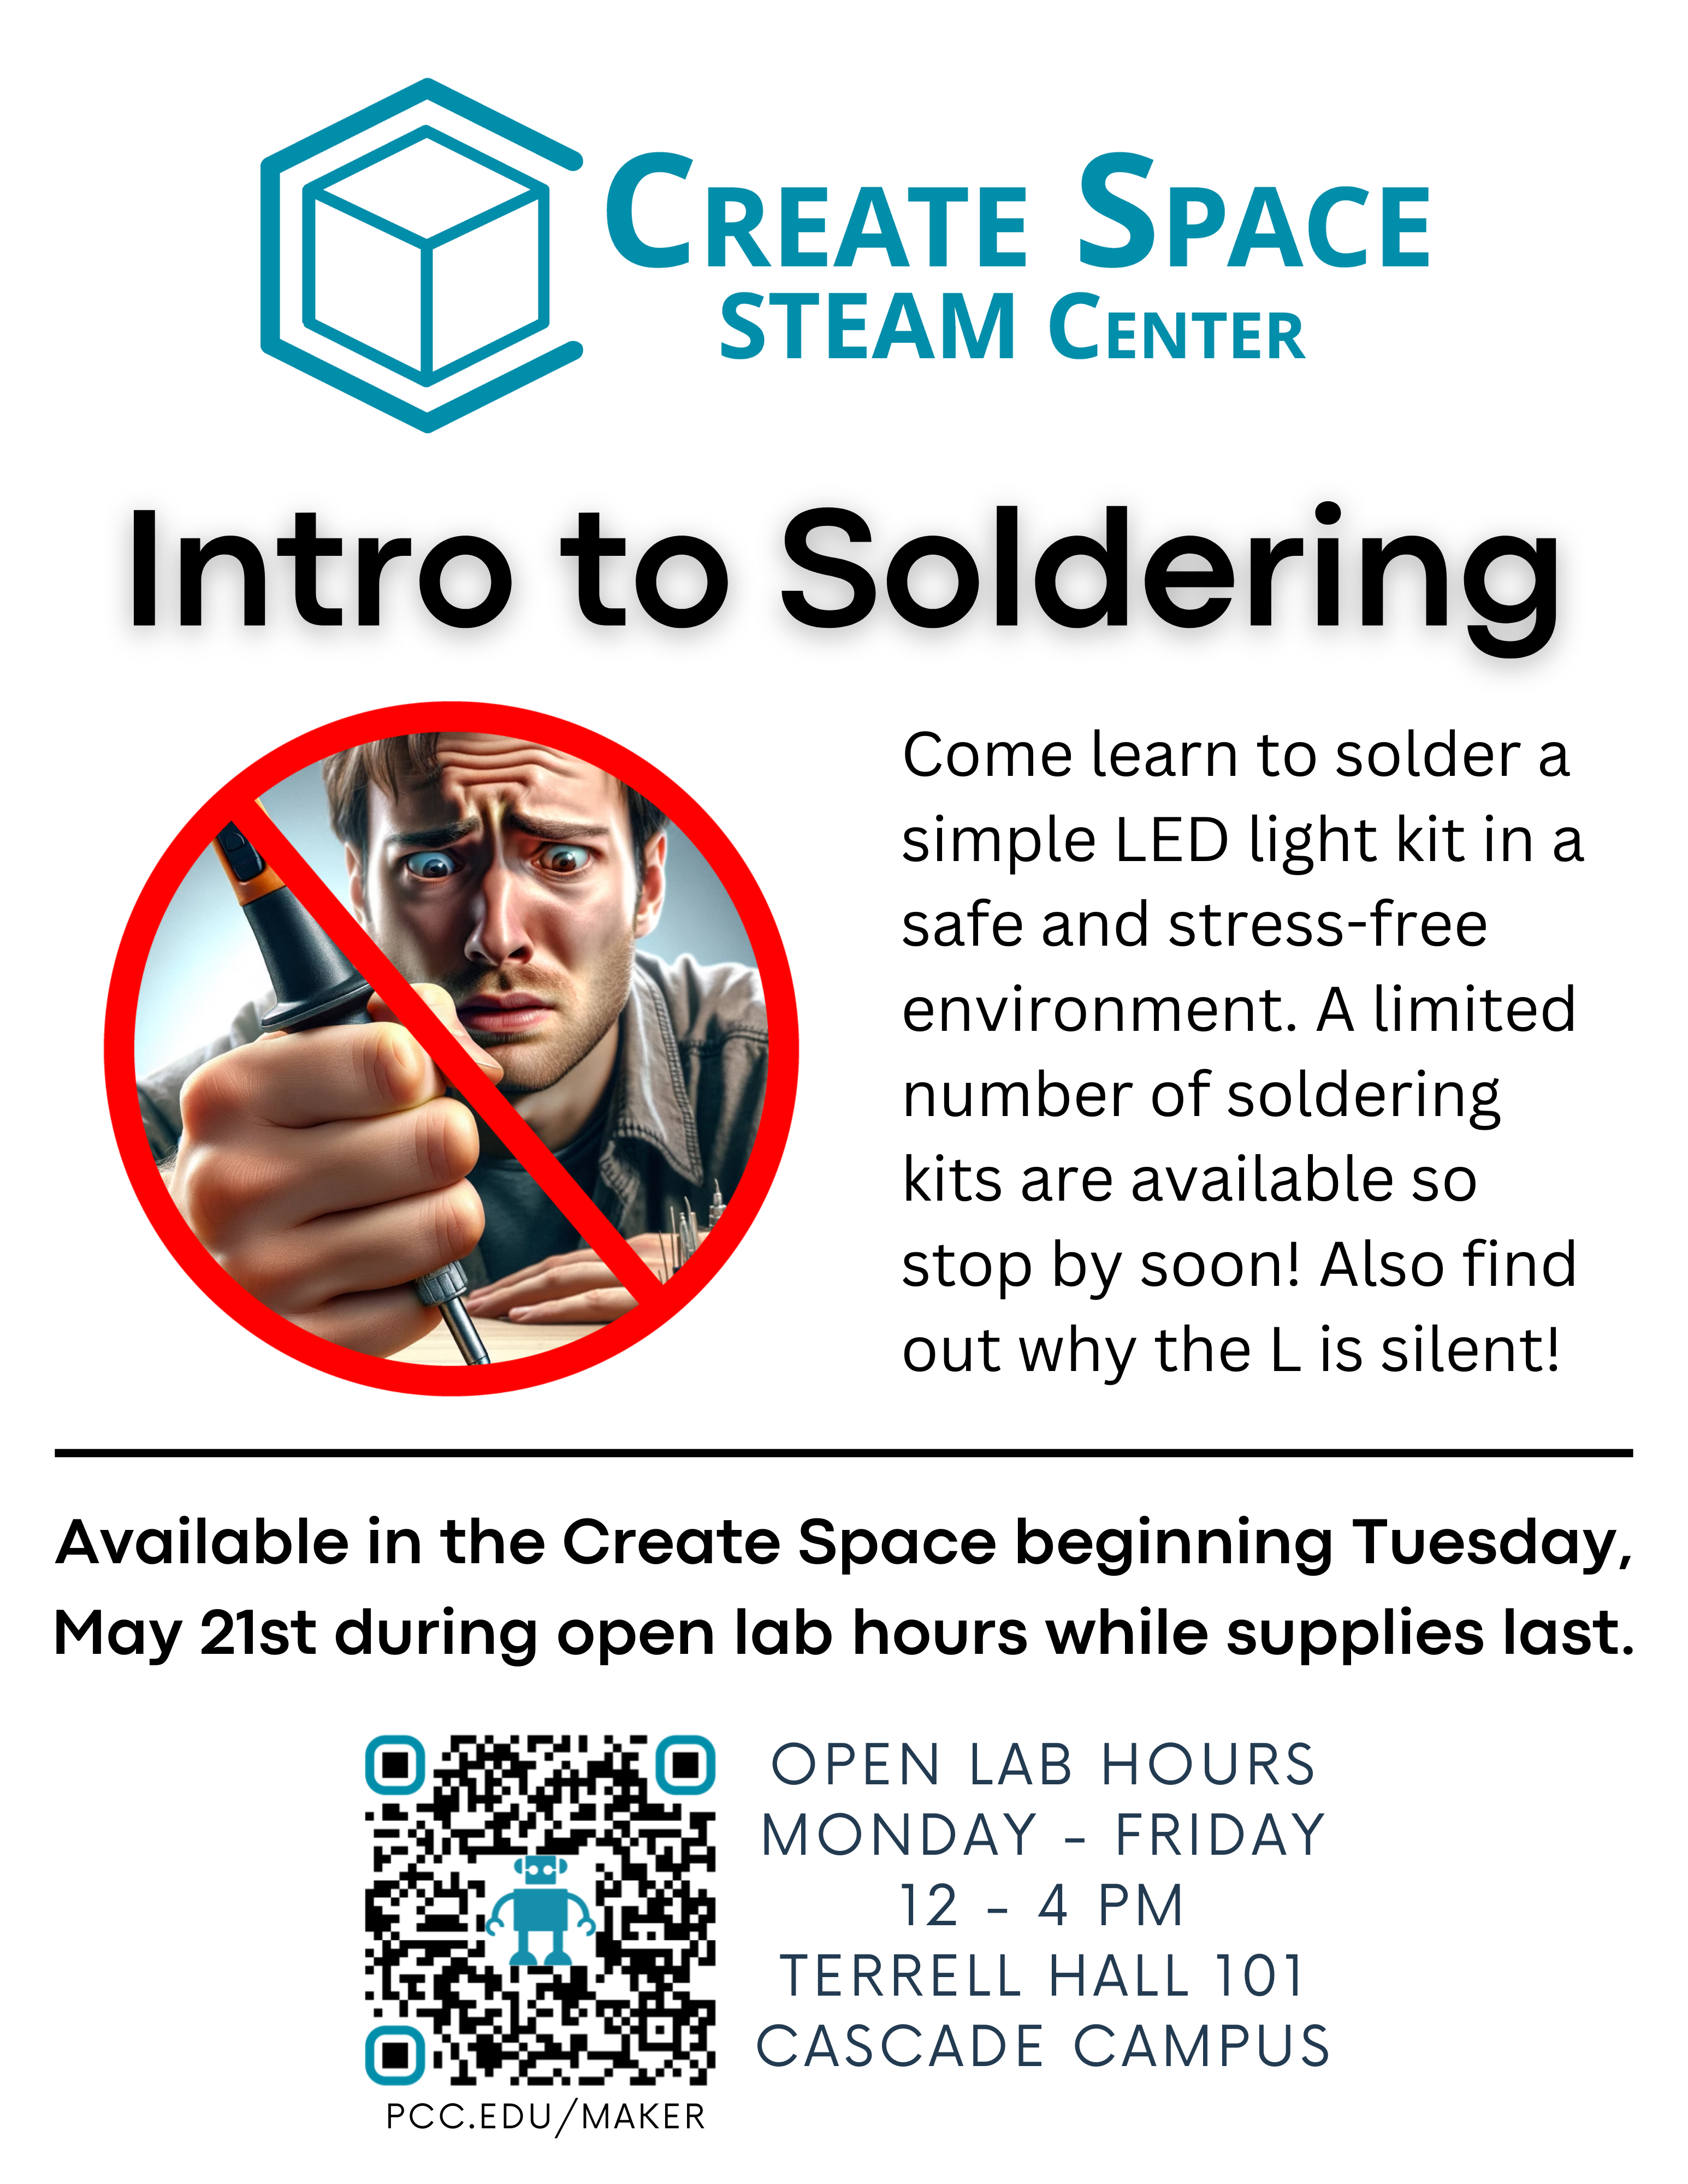 Create Space STEAM Center Intro to Soldering Available in the Create Space beginning Tuesday, May 21st during open lab hours while supplies last. Come learn to solder a simple LED light kit in a safe and stress-free environment. A limited number of soldering kits are available so stop by soon! Also find out why the L is silent! Open Lab Hours Monday - Friday 12 - 4 PM Terrell Hall 101 Cascade Campus pcc.edu/maker